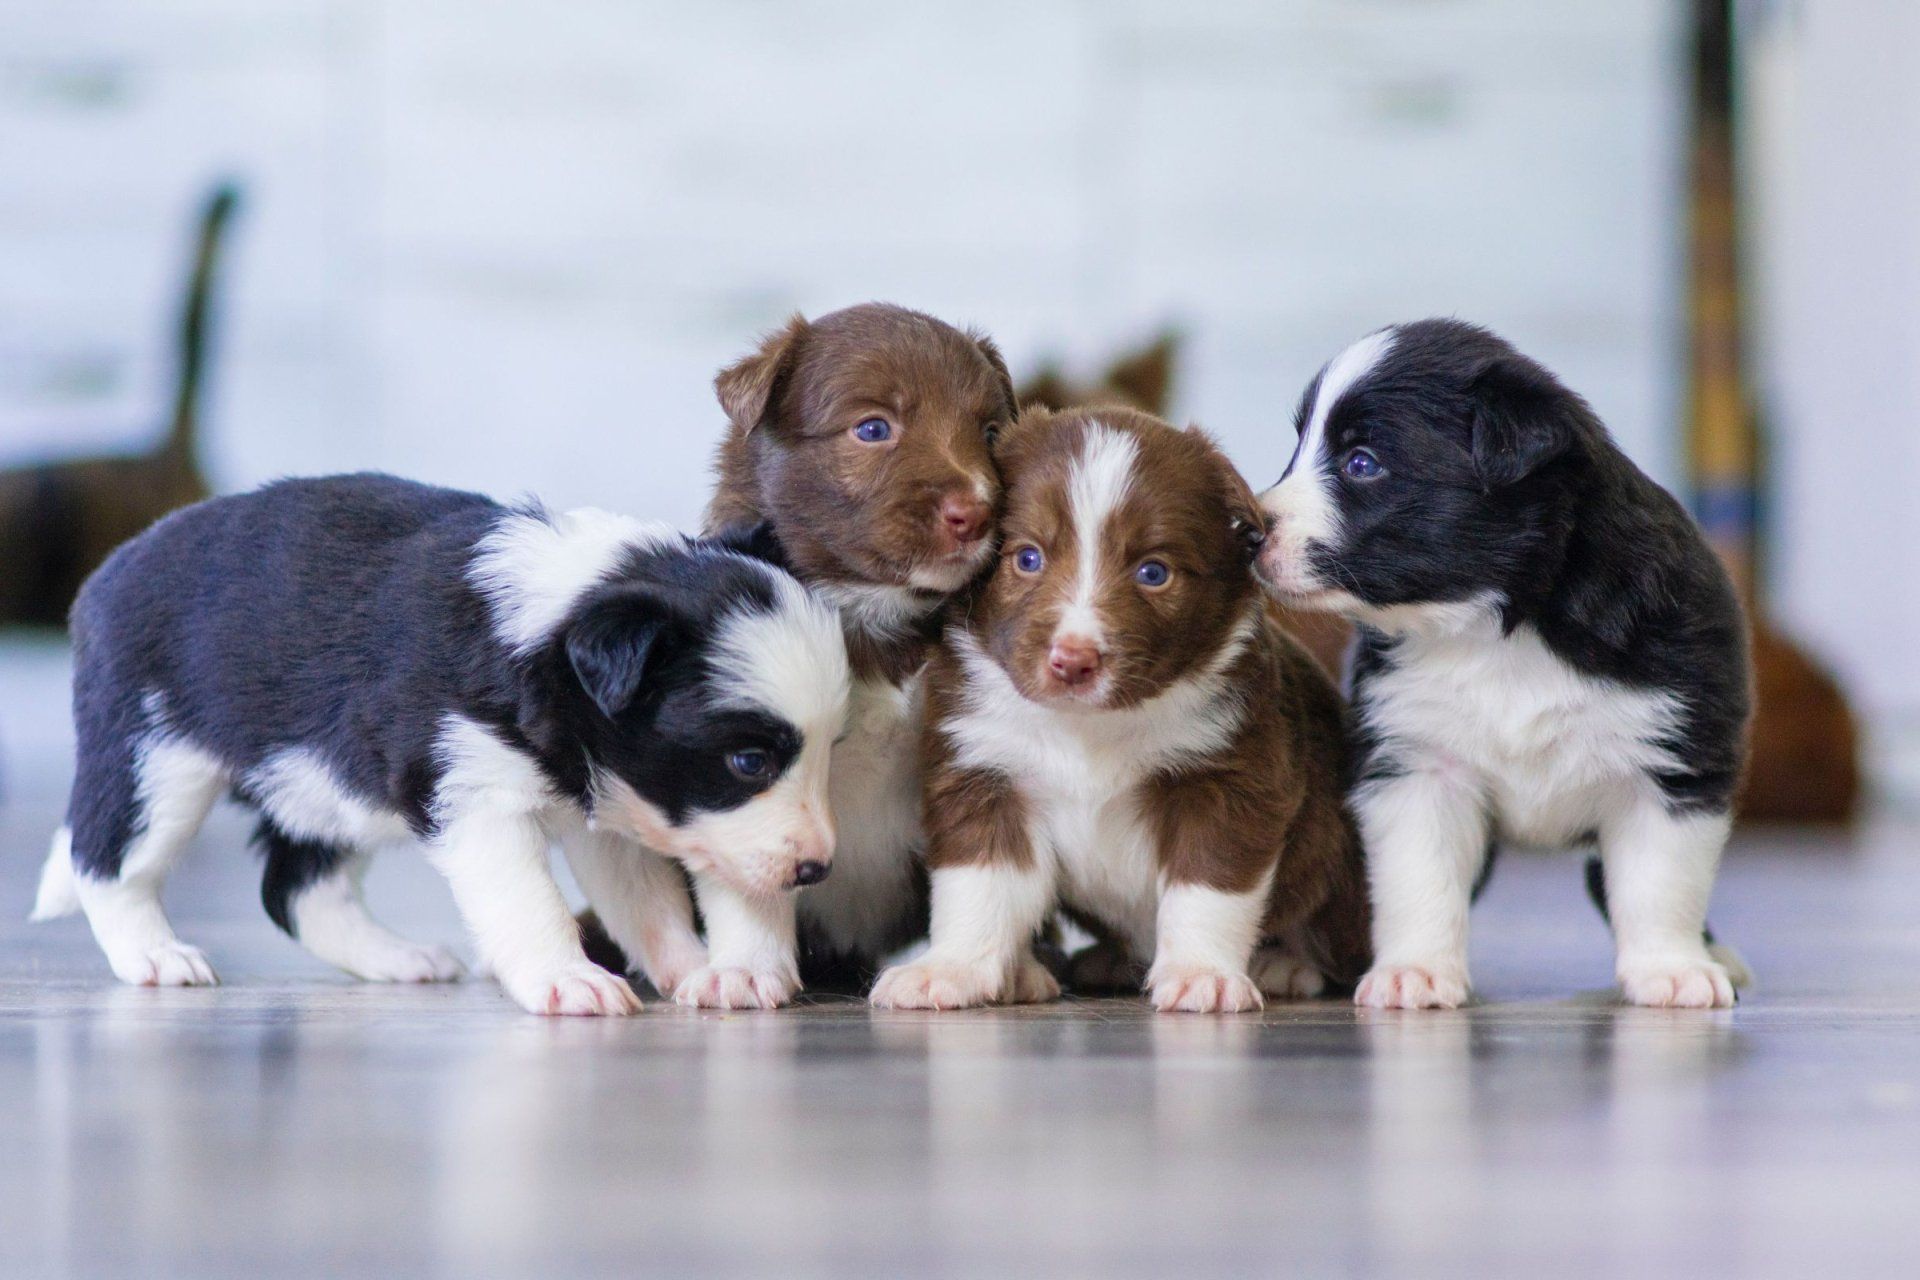 four puppies are standing next to each other on the floor